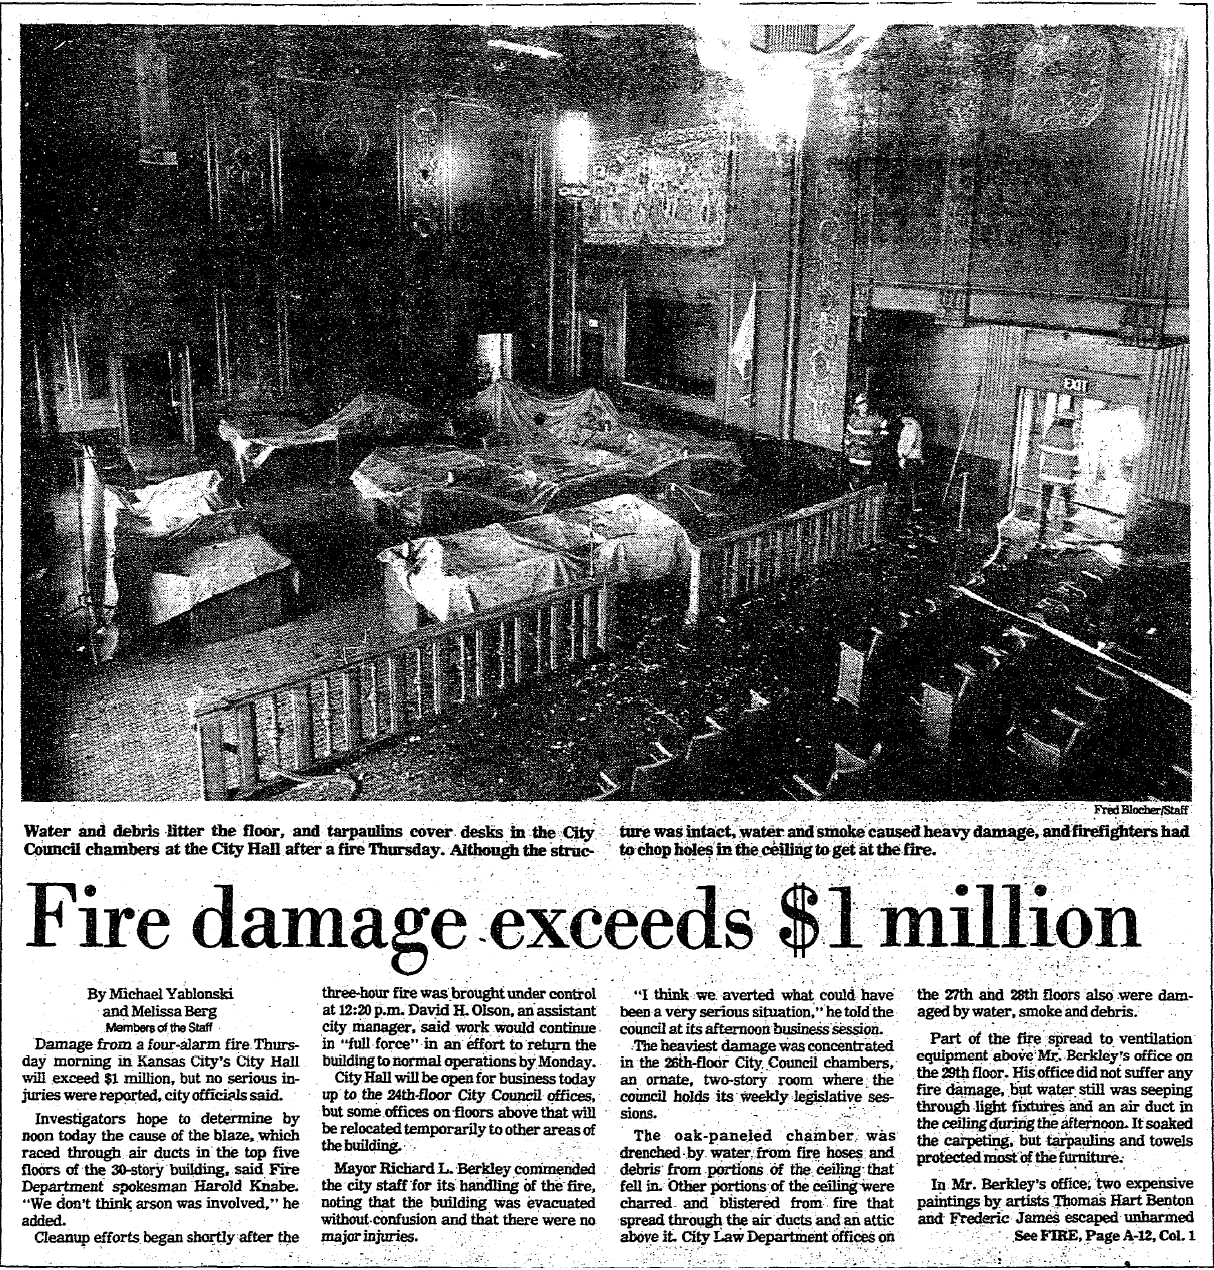 An image of the Kansas City Star article detailing a fire that caused damage to the top several floors of City Hall, including smoke and water damage to the Council Chamber.